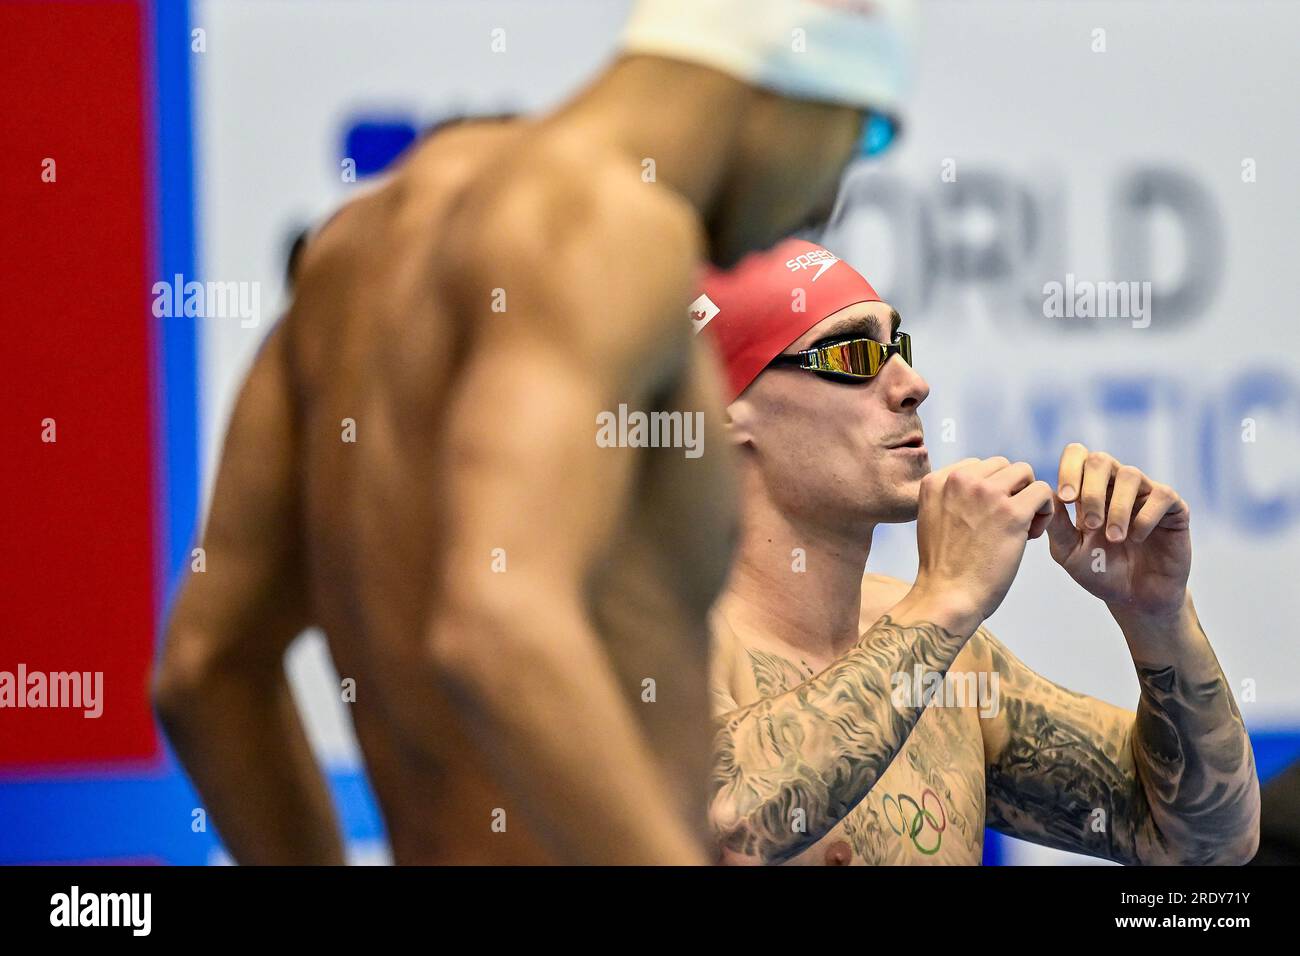 Fukuoka, Japan. 23rd July, 2023. Jacob Peters of Great Britain prepares to compete in the Men's Butterfly 50m Semifinal during the 20th World Aquatics Championships at the Marine Messe Hall A in Fukuoka (Japan), July 23rd, 2023. Credit: Insidefoto di andrea staccioli/Alamy Live News Stock Photo